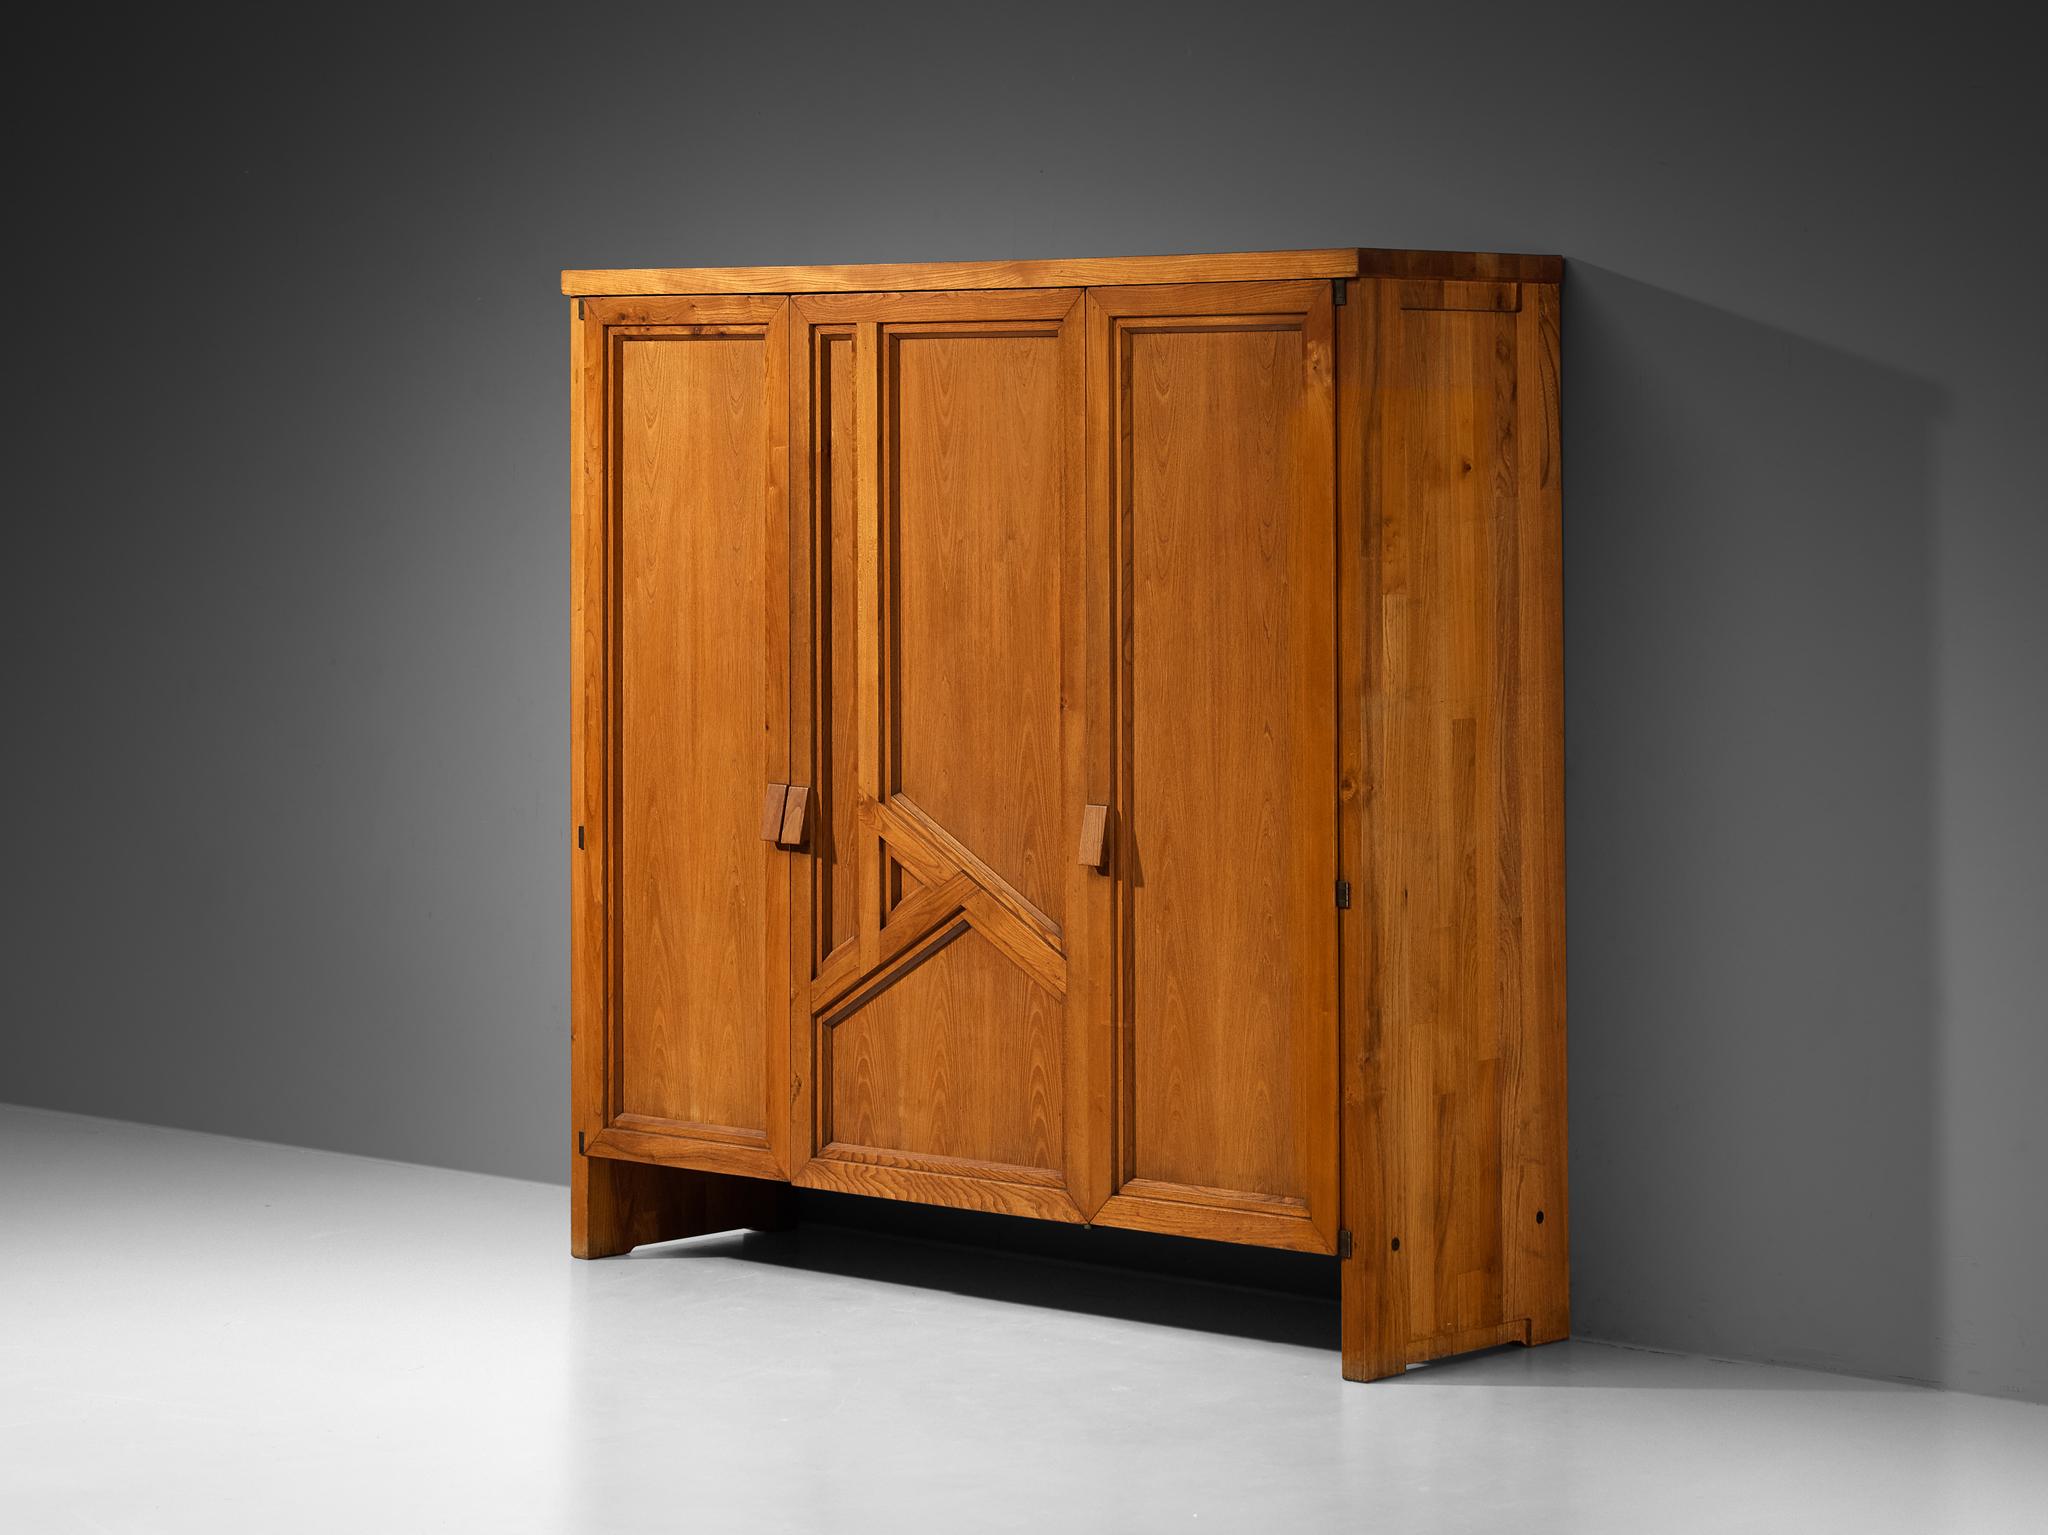 Pierre Chapo, 'Goya' wardrobe, model 'R26D', solid elm, mirrored glass, brass-plated steel, France, 1970s

An exceptional armoire designed by Pierre Chapo known as model 'Goya'. The door panels are beautifully constructed with a well-defined